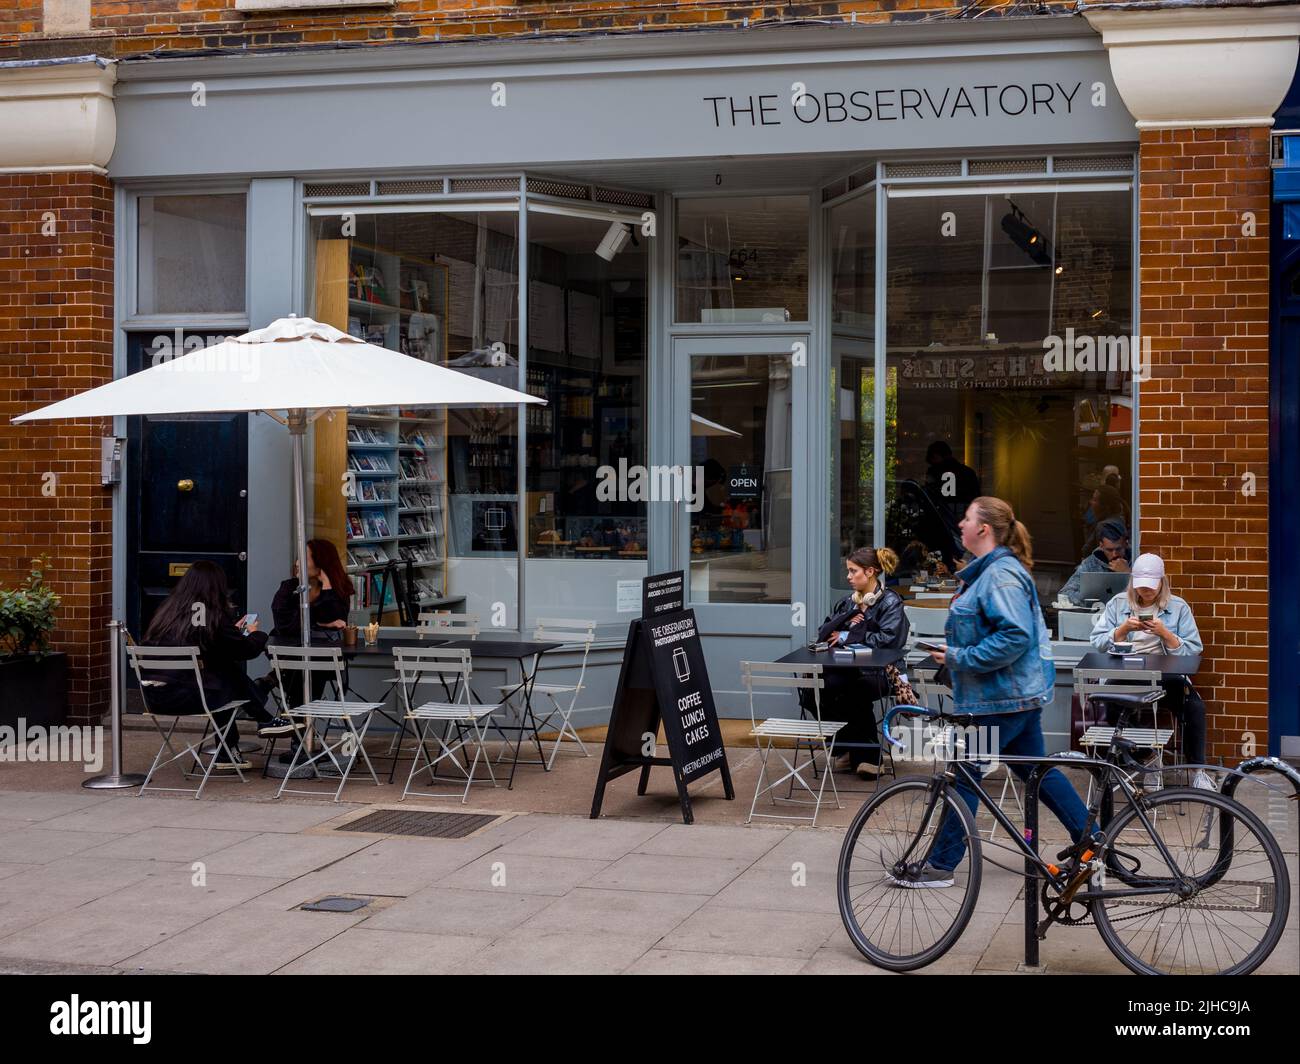 The Observatory Photography Gallery & Cafe at 64 Marchmont Street, Bloomsbury London. Foto Stock